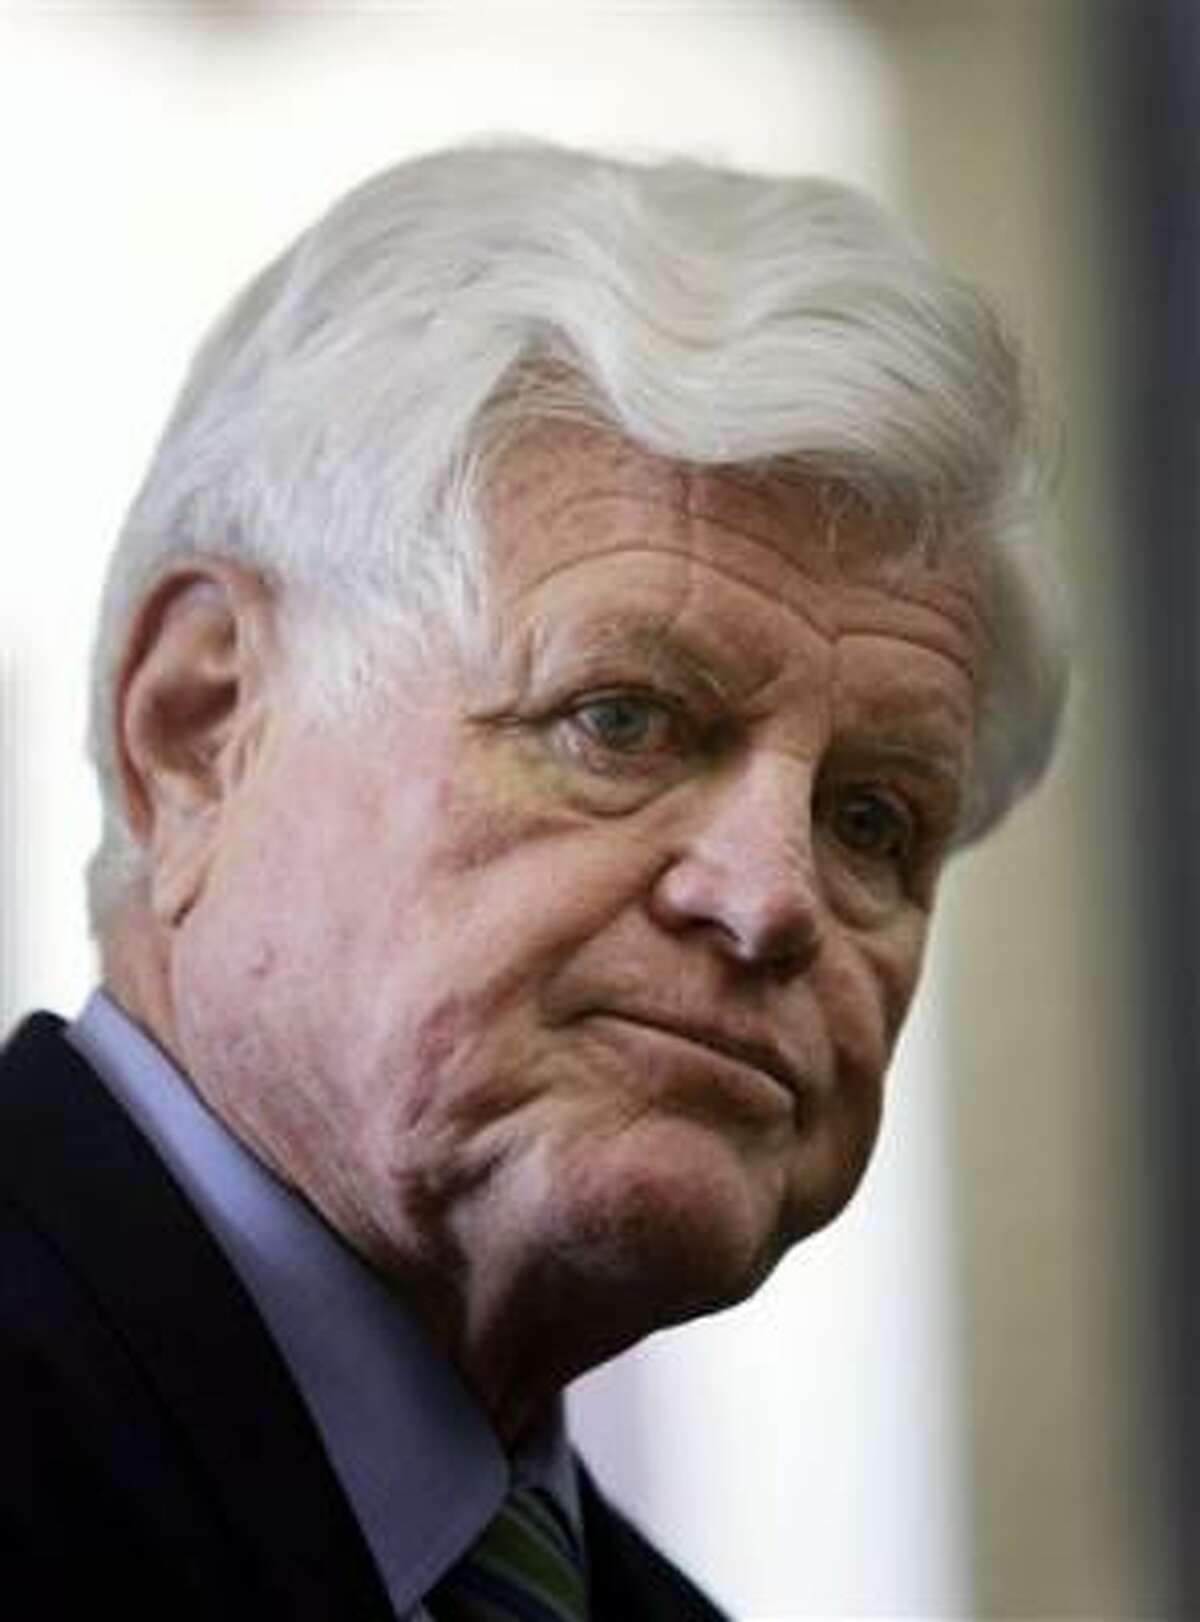 Sen. Edward Kennedy, D-Mass., takes part in a Capitol Hill news conference, Wednesday, June 21, 2006.